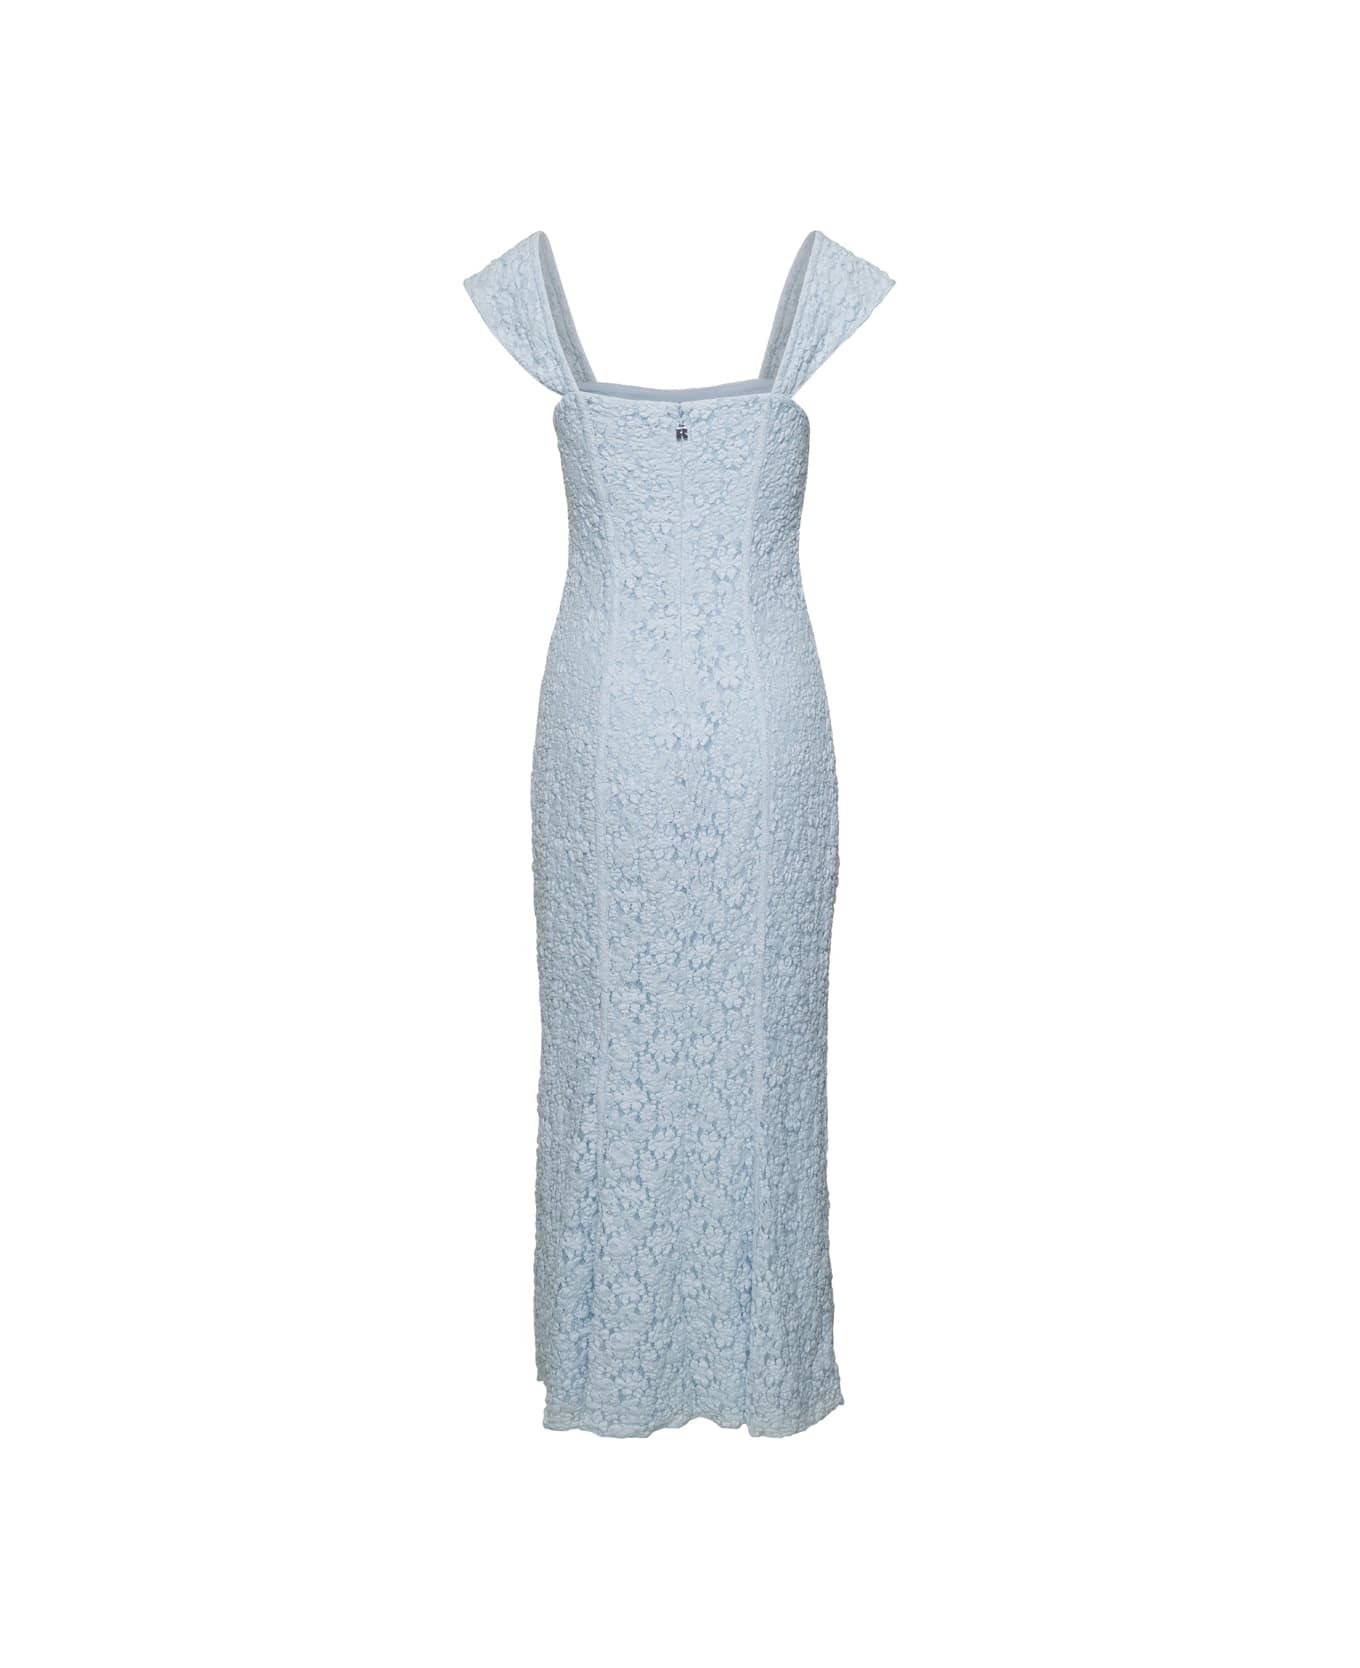 Rotate by Birger Christensen Lace Wide Strap Dress - Omphalodes